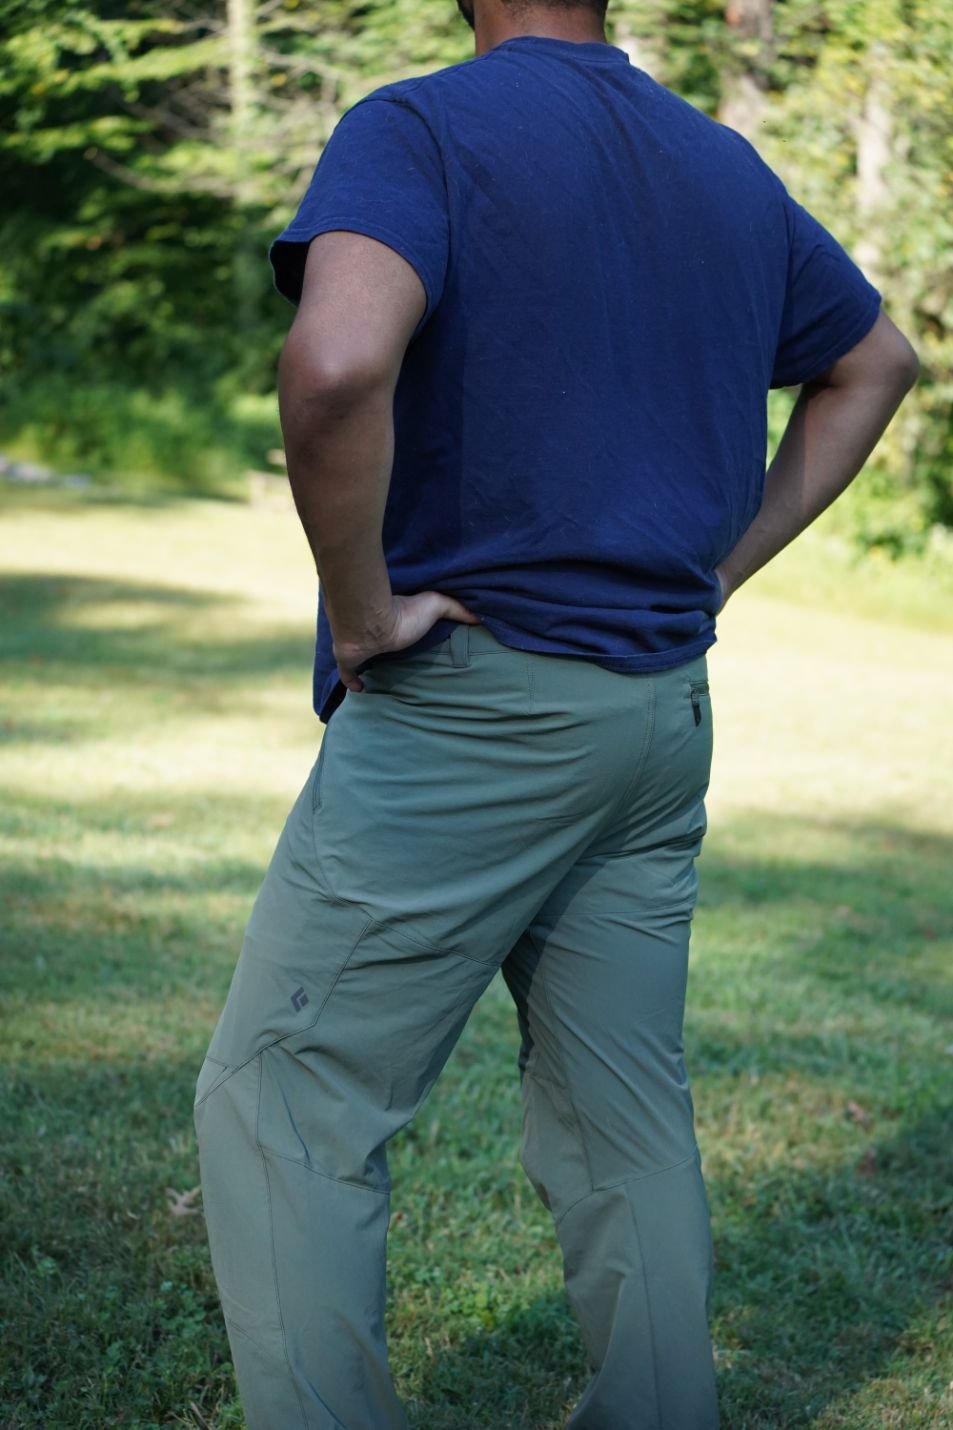 A view from behind of the author wearing the Black Diamond Swift men's hiking pants